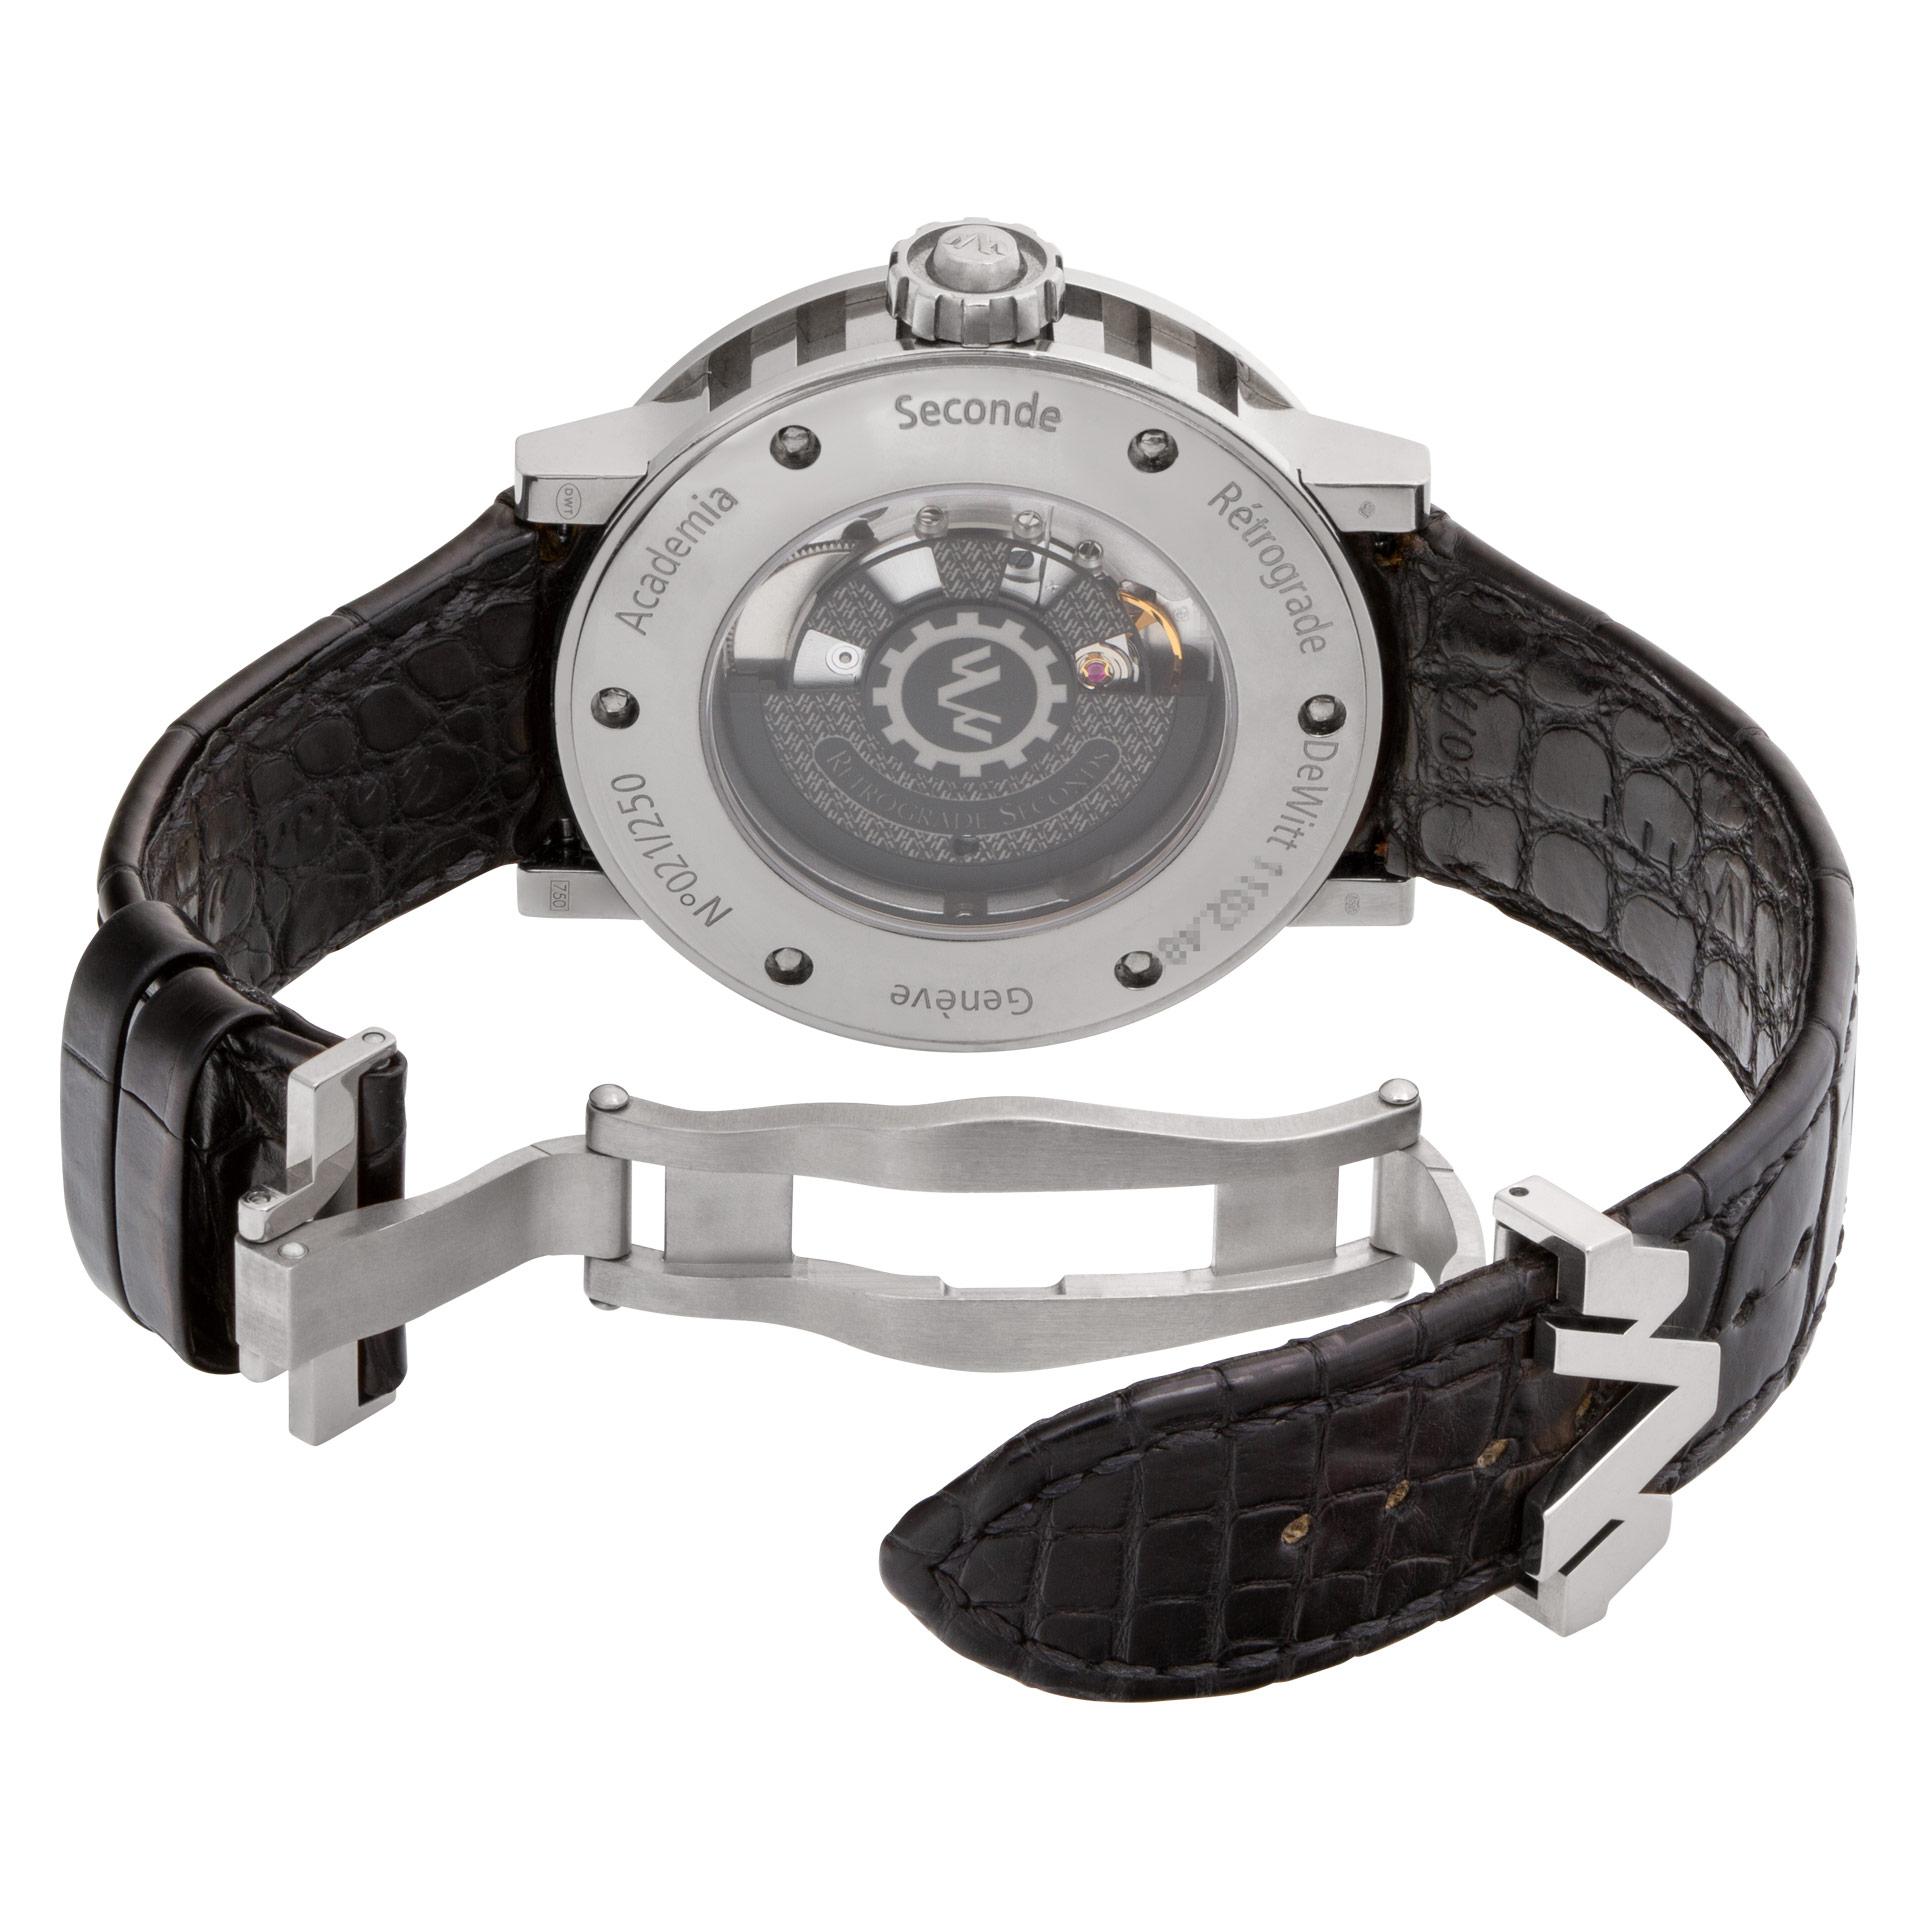 Men's Dewitt Retrograde Ref. 1102.48 Watch in 18k White Gold, Box and Papers